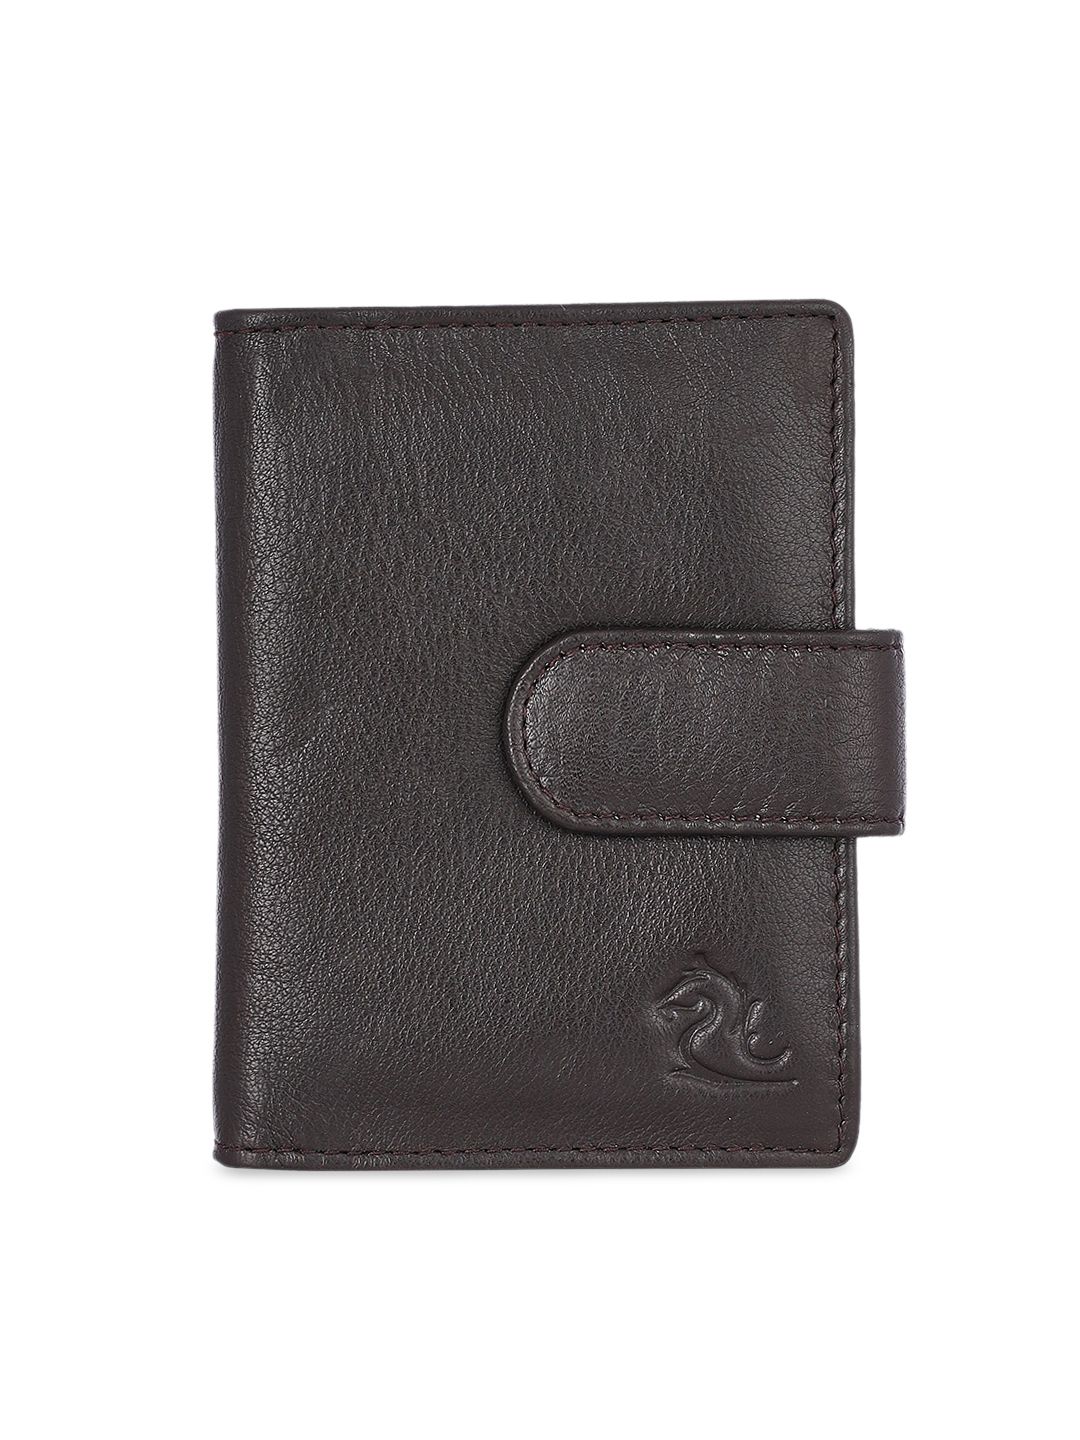 Kara Unisex Brown Solid Leather Card Holder Price in India